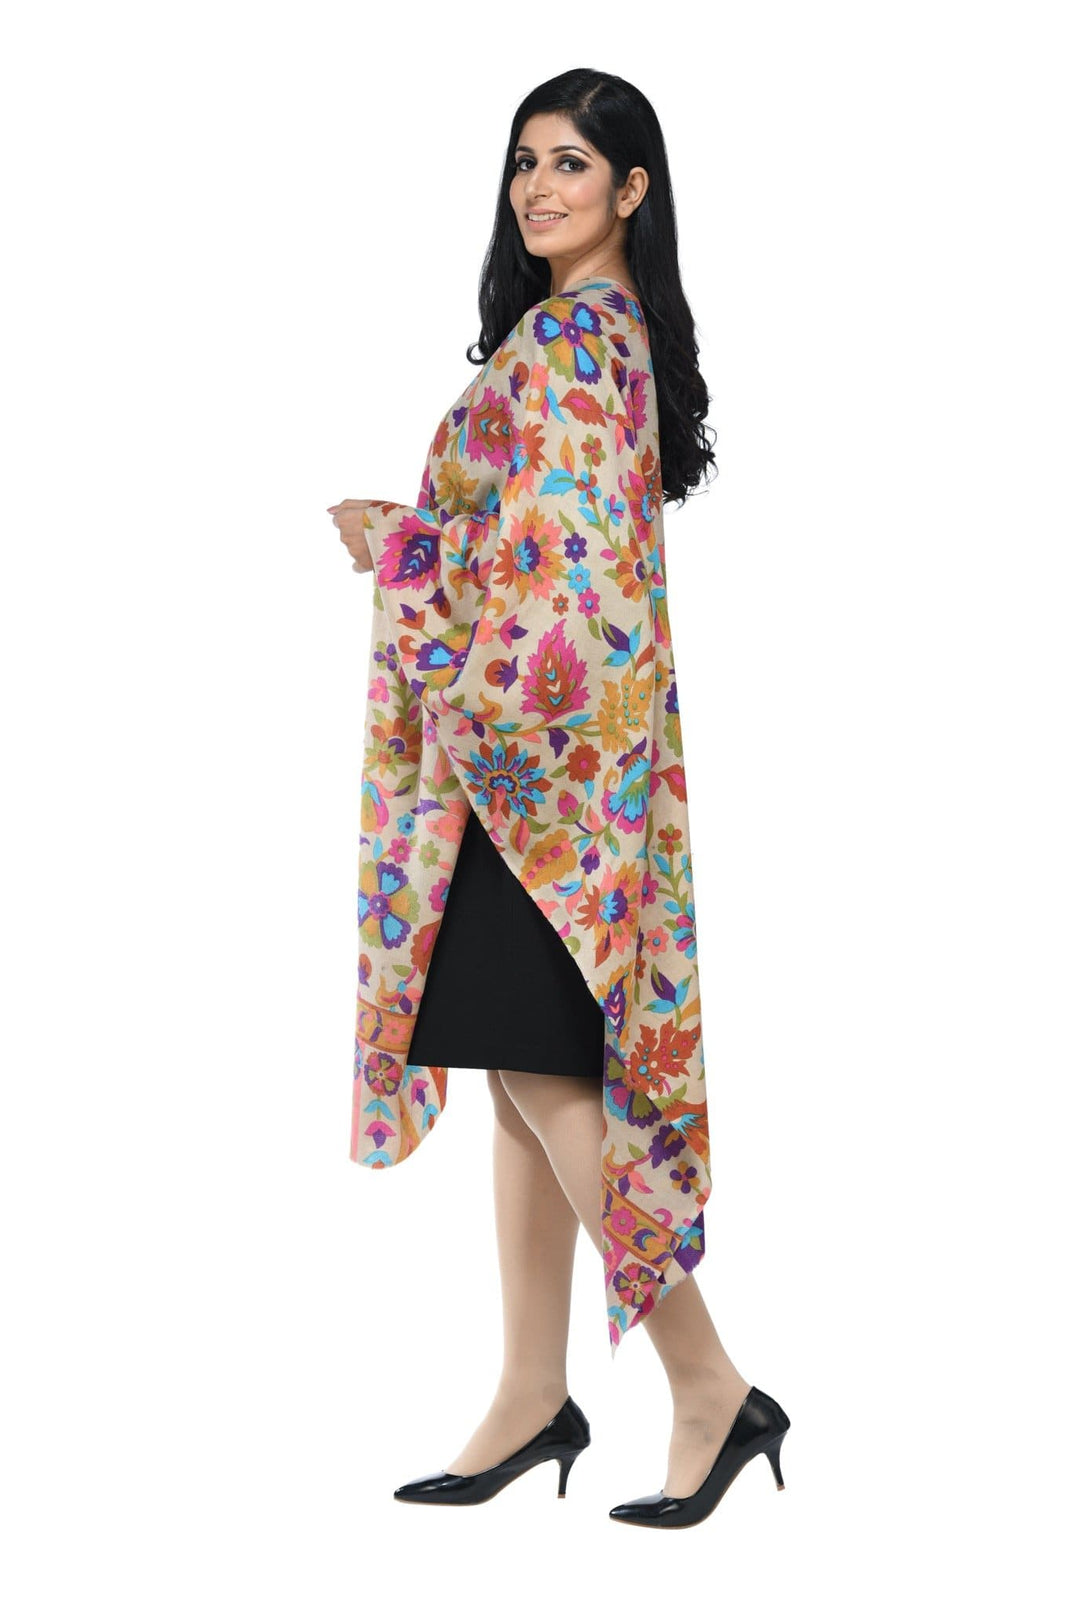 Pashwool 70x200 Pashwool Womens Floral Printed Stole, Fine Wool, Soft and Warm